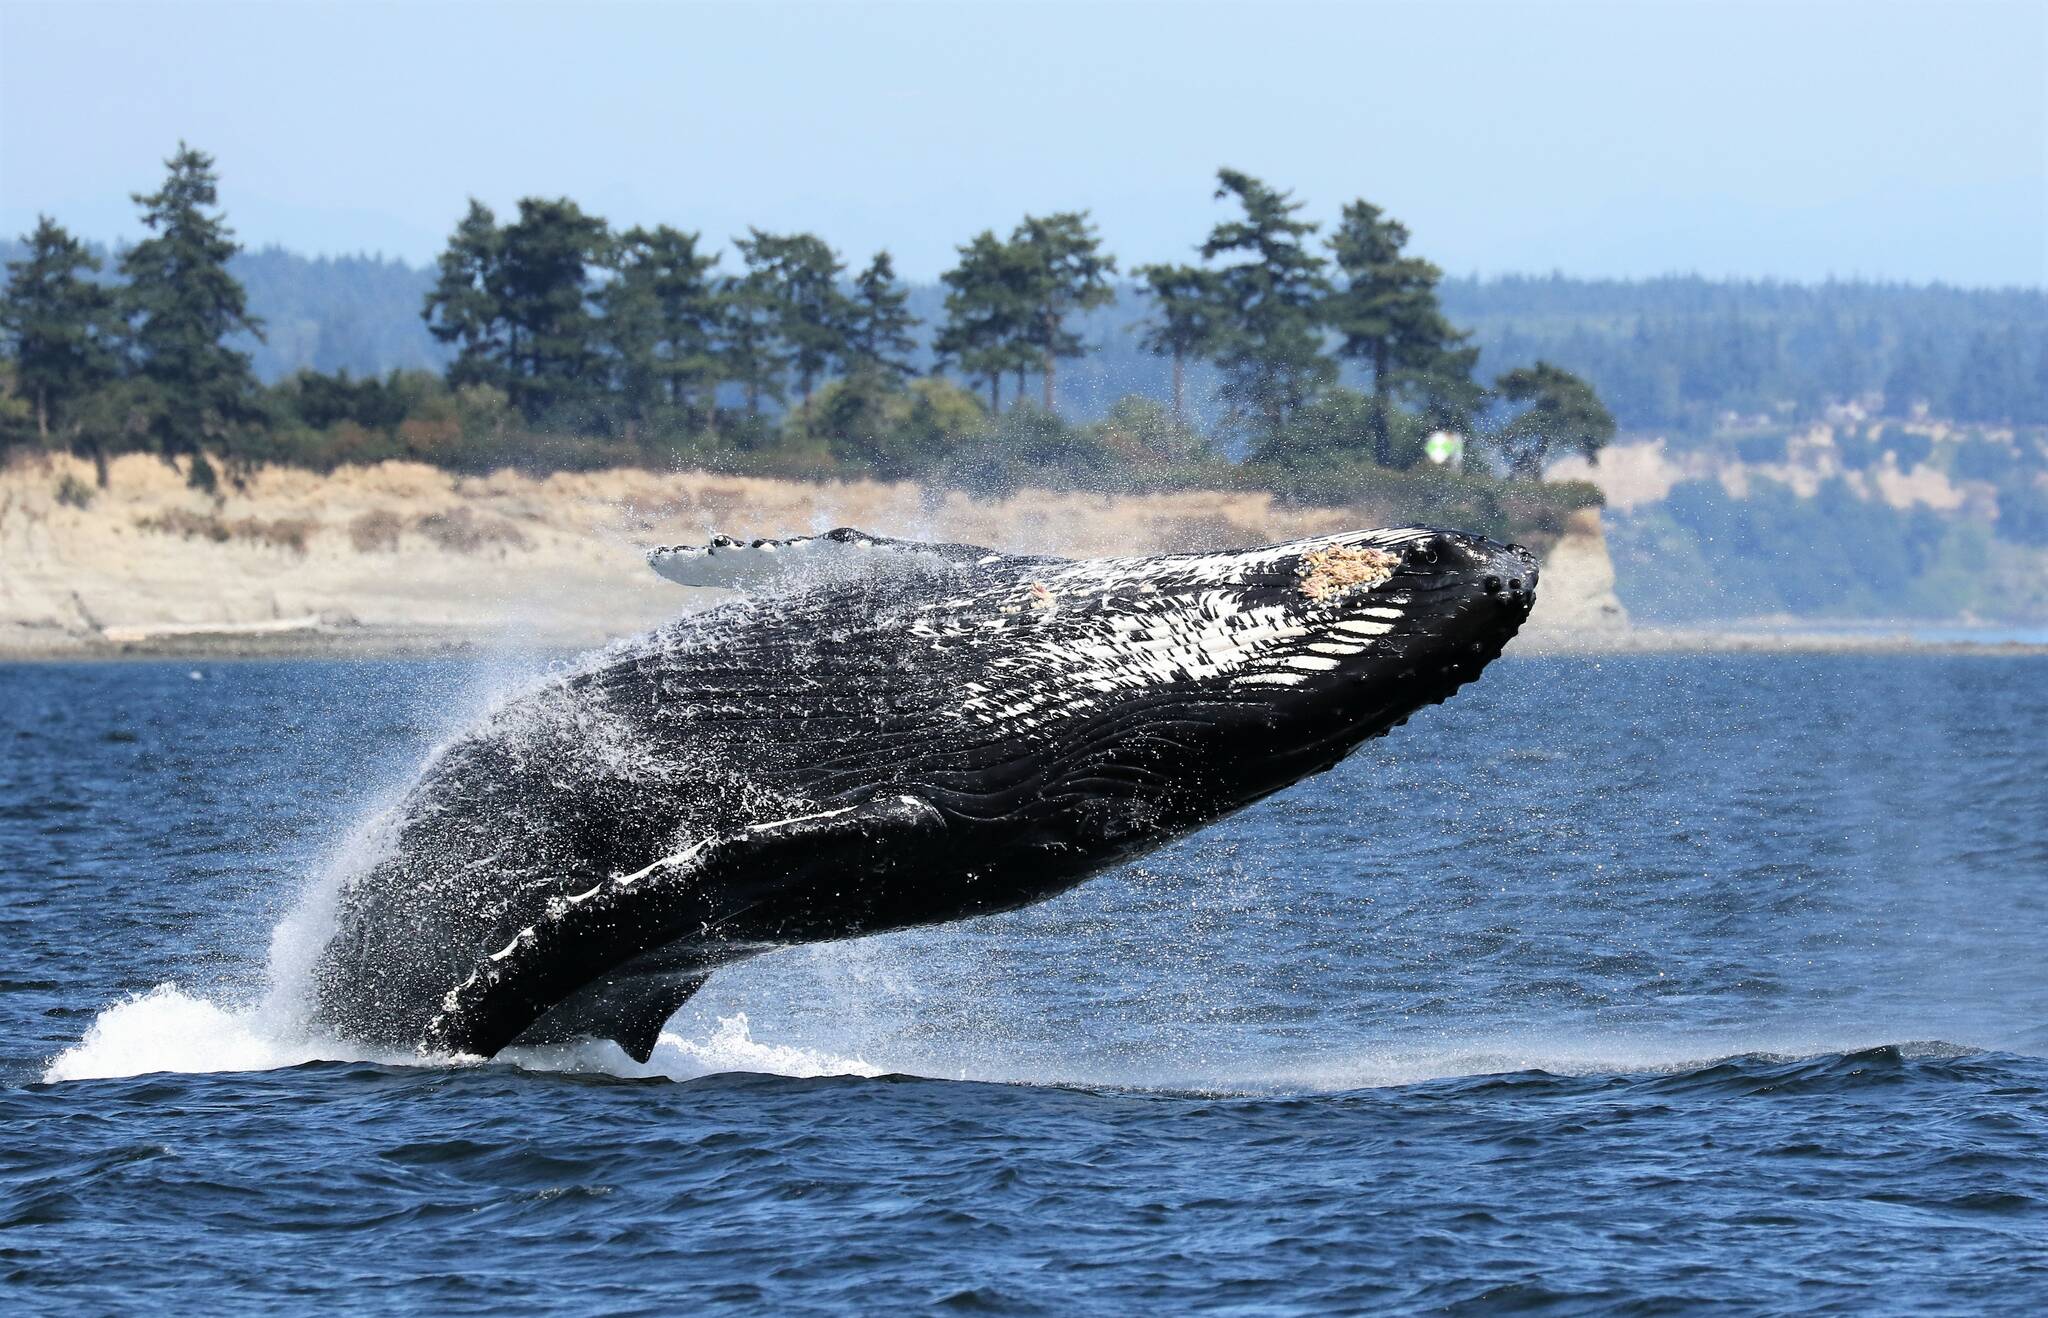 Photo by Jill Hein
Humpback whales have been spotted more frequently lately around Whidbey Island.